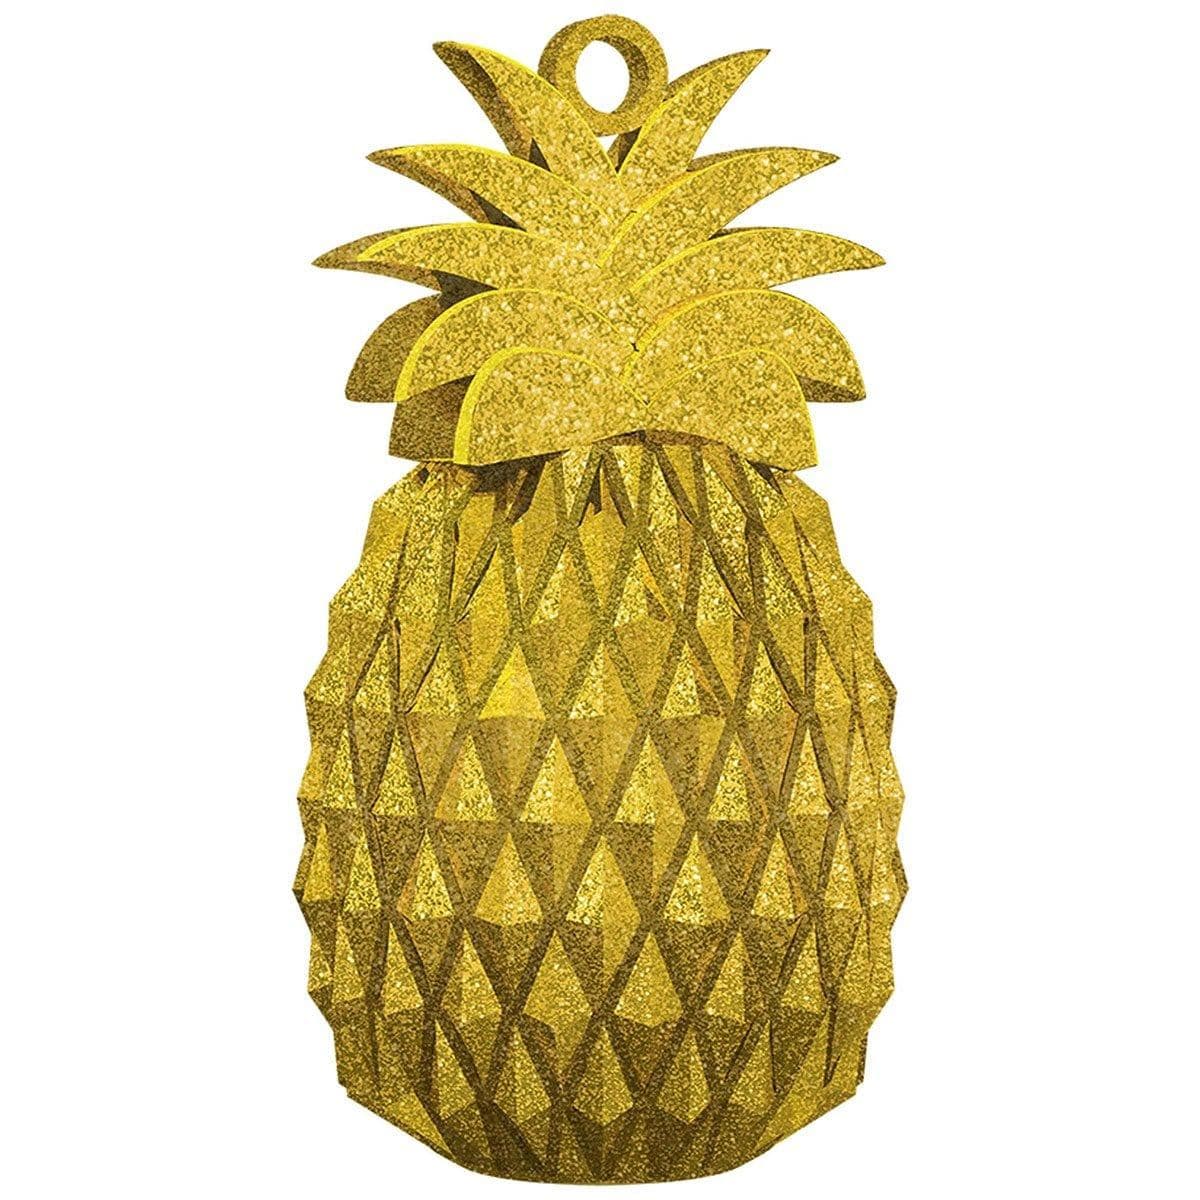 Buy Balloons Gold Aloha Pineapple Balloon Weight sold at Party Expert